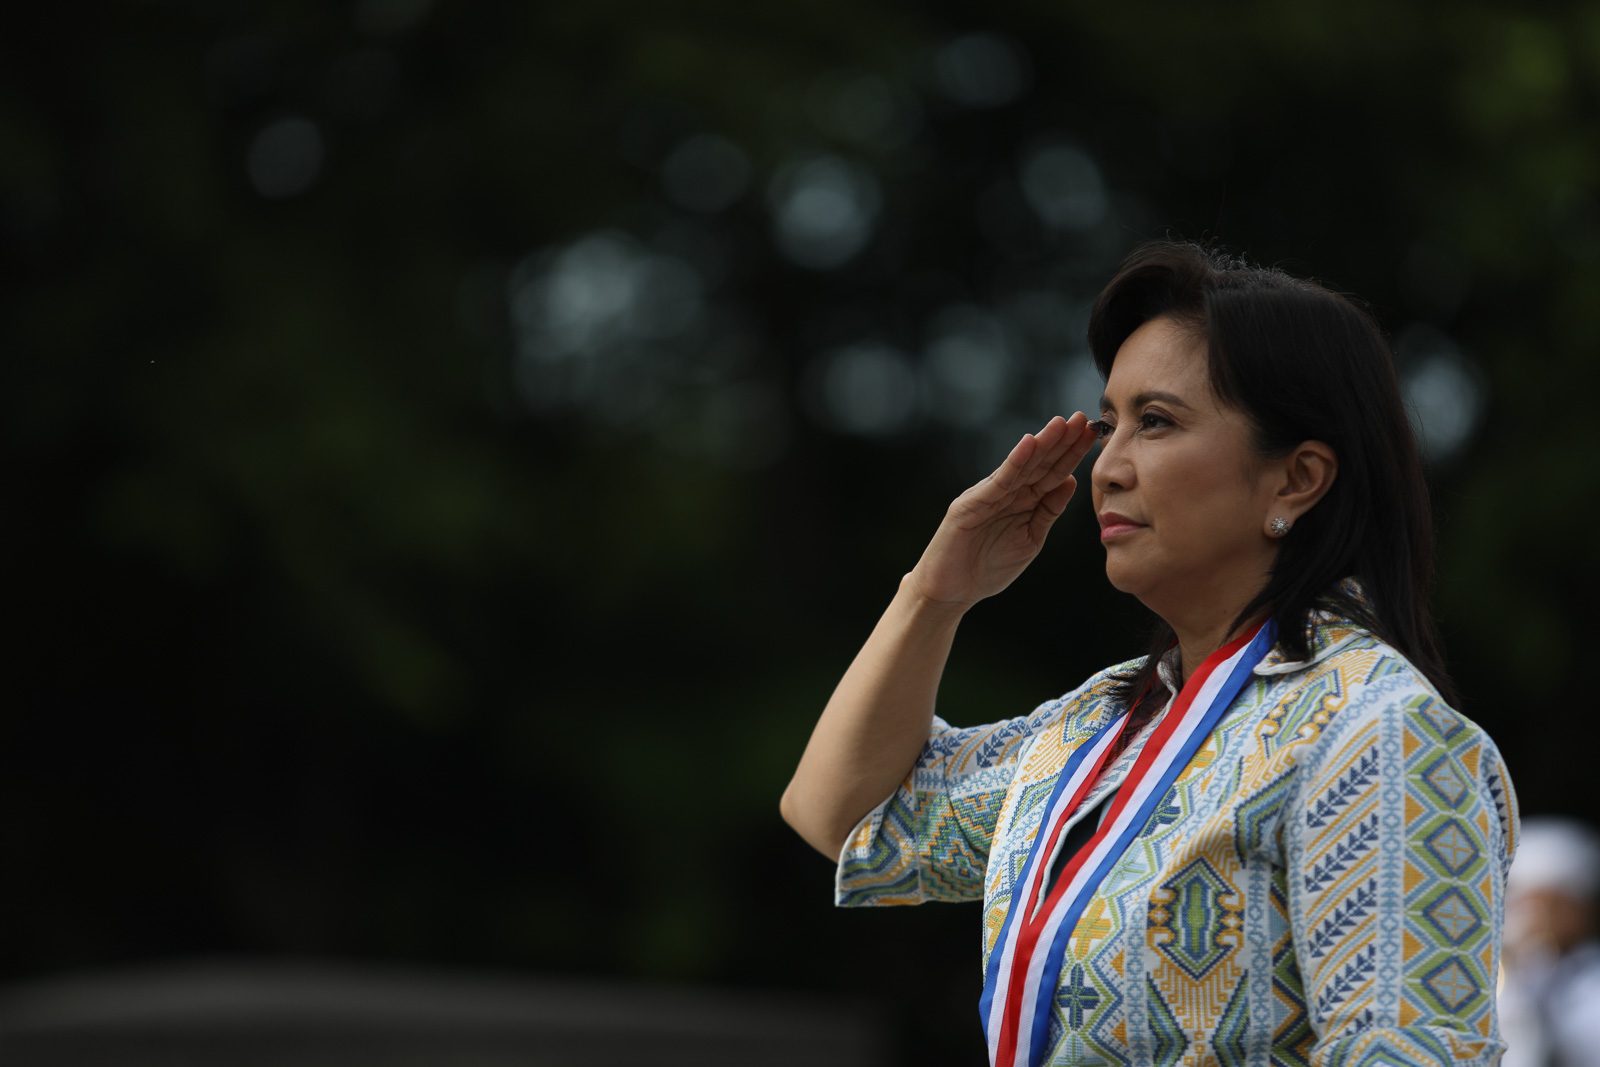 Robredo to Filipinos: It’s our duty to ensure a ‘free, just, humane’ society